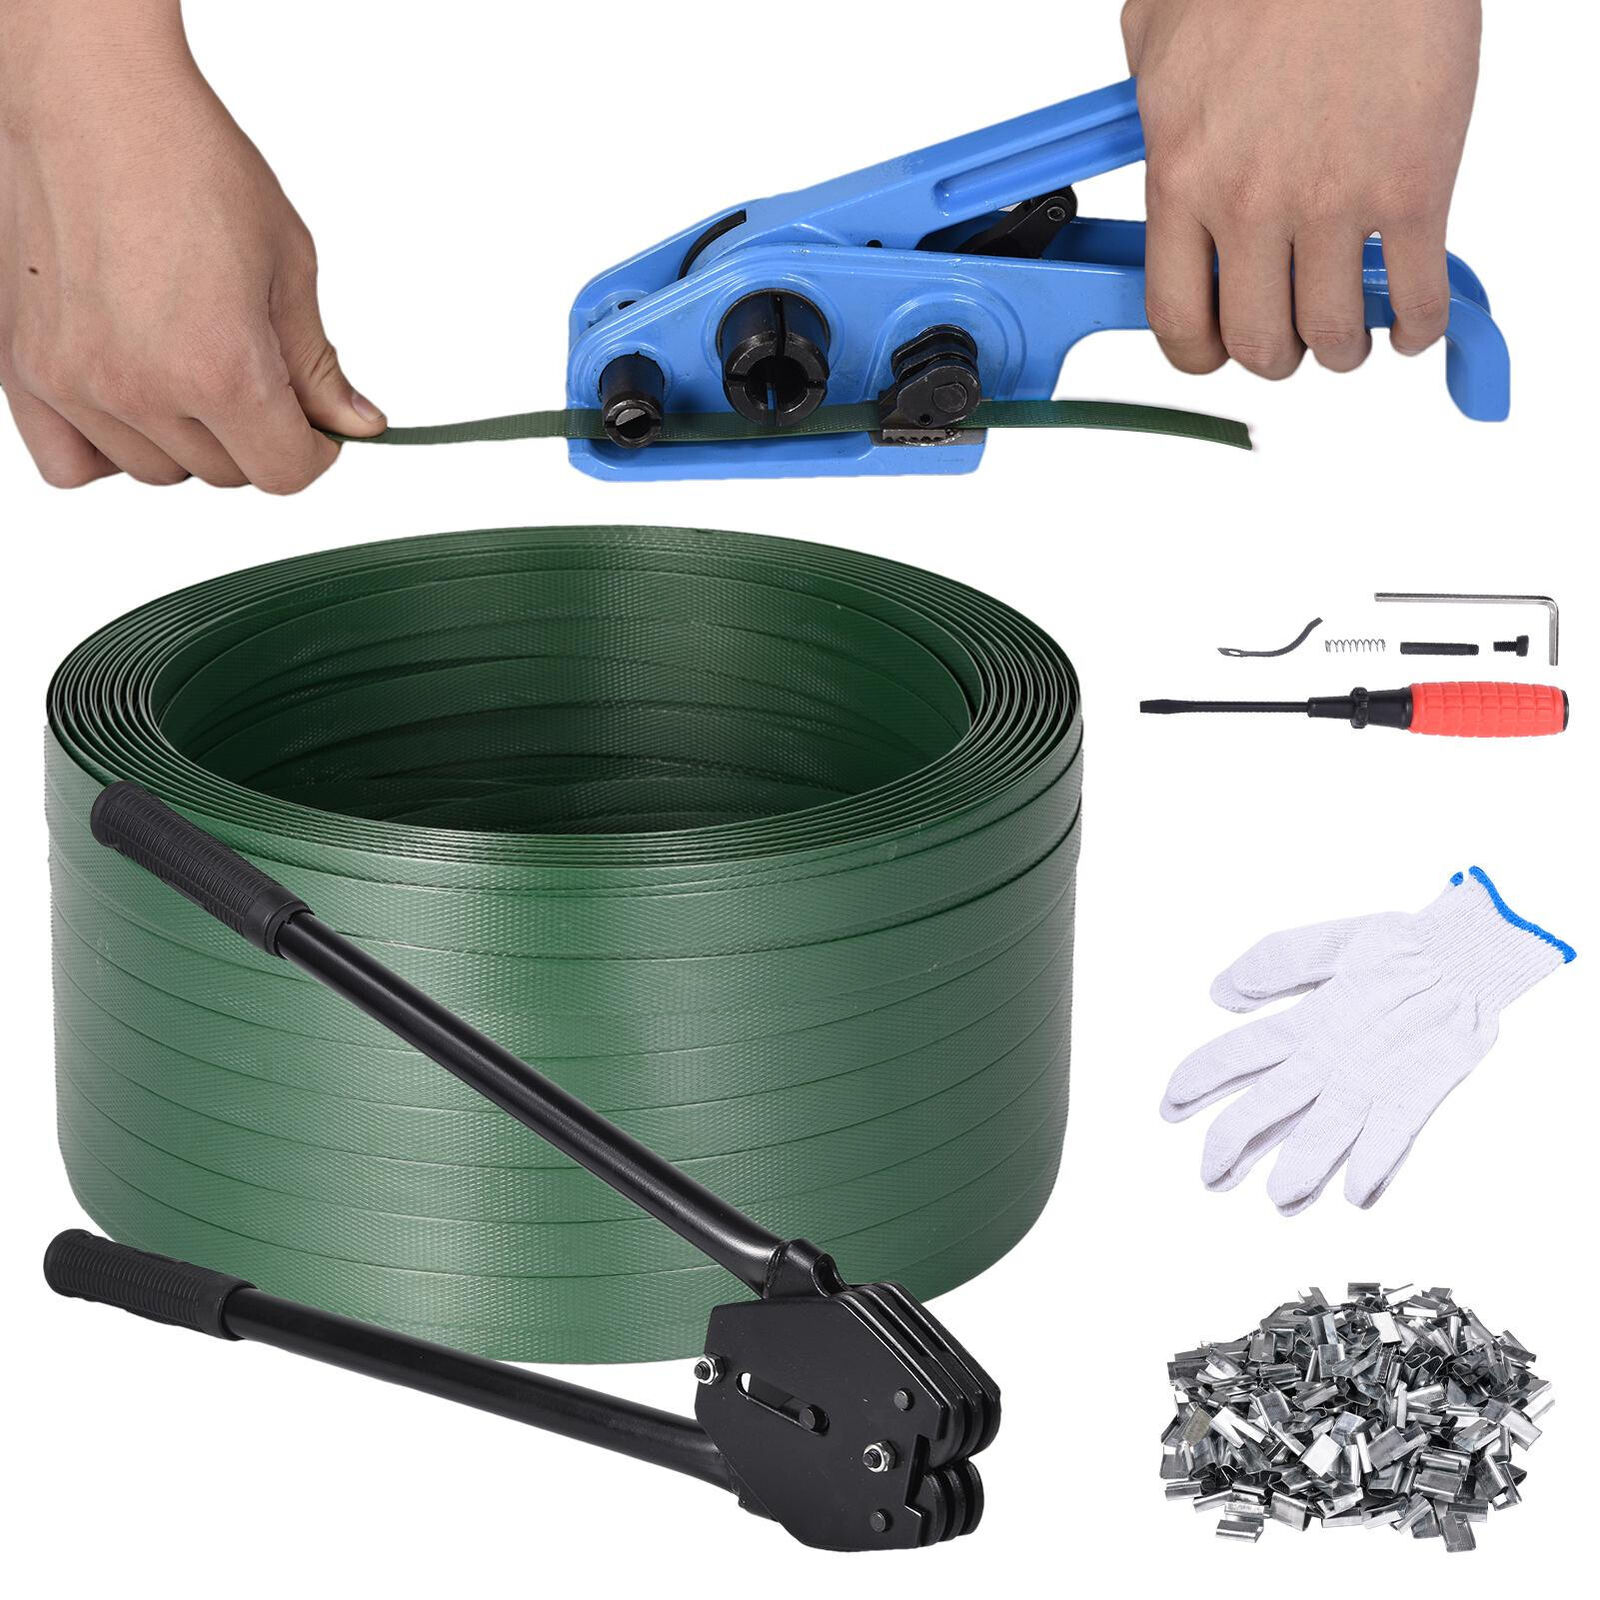 Pallet Strapping Banding Kit Coil 4.5kg Banding Tool For Home Factory  us